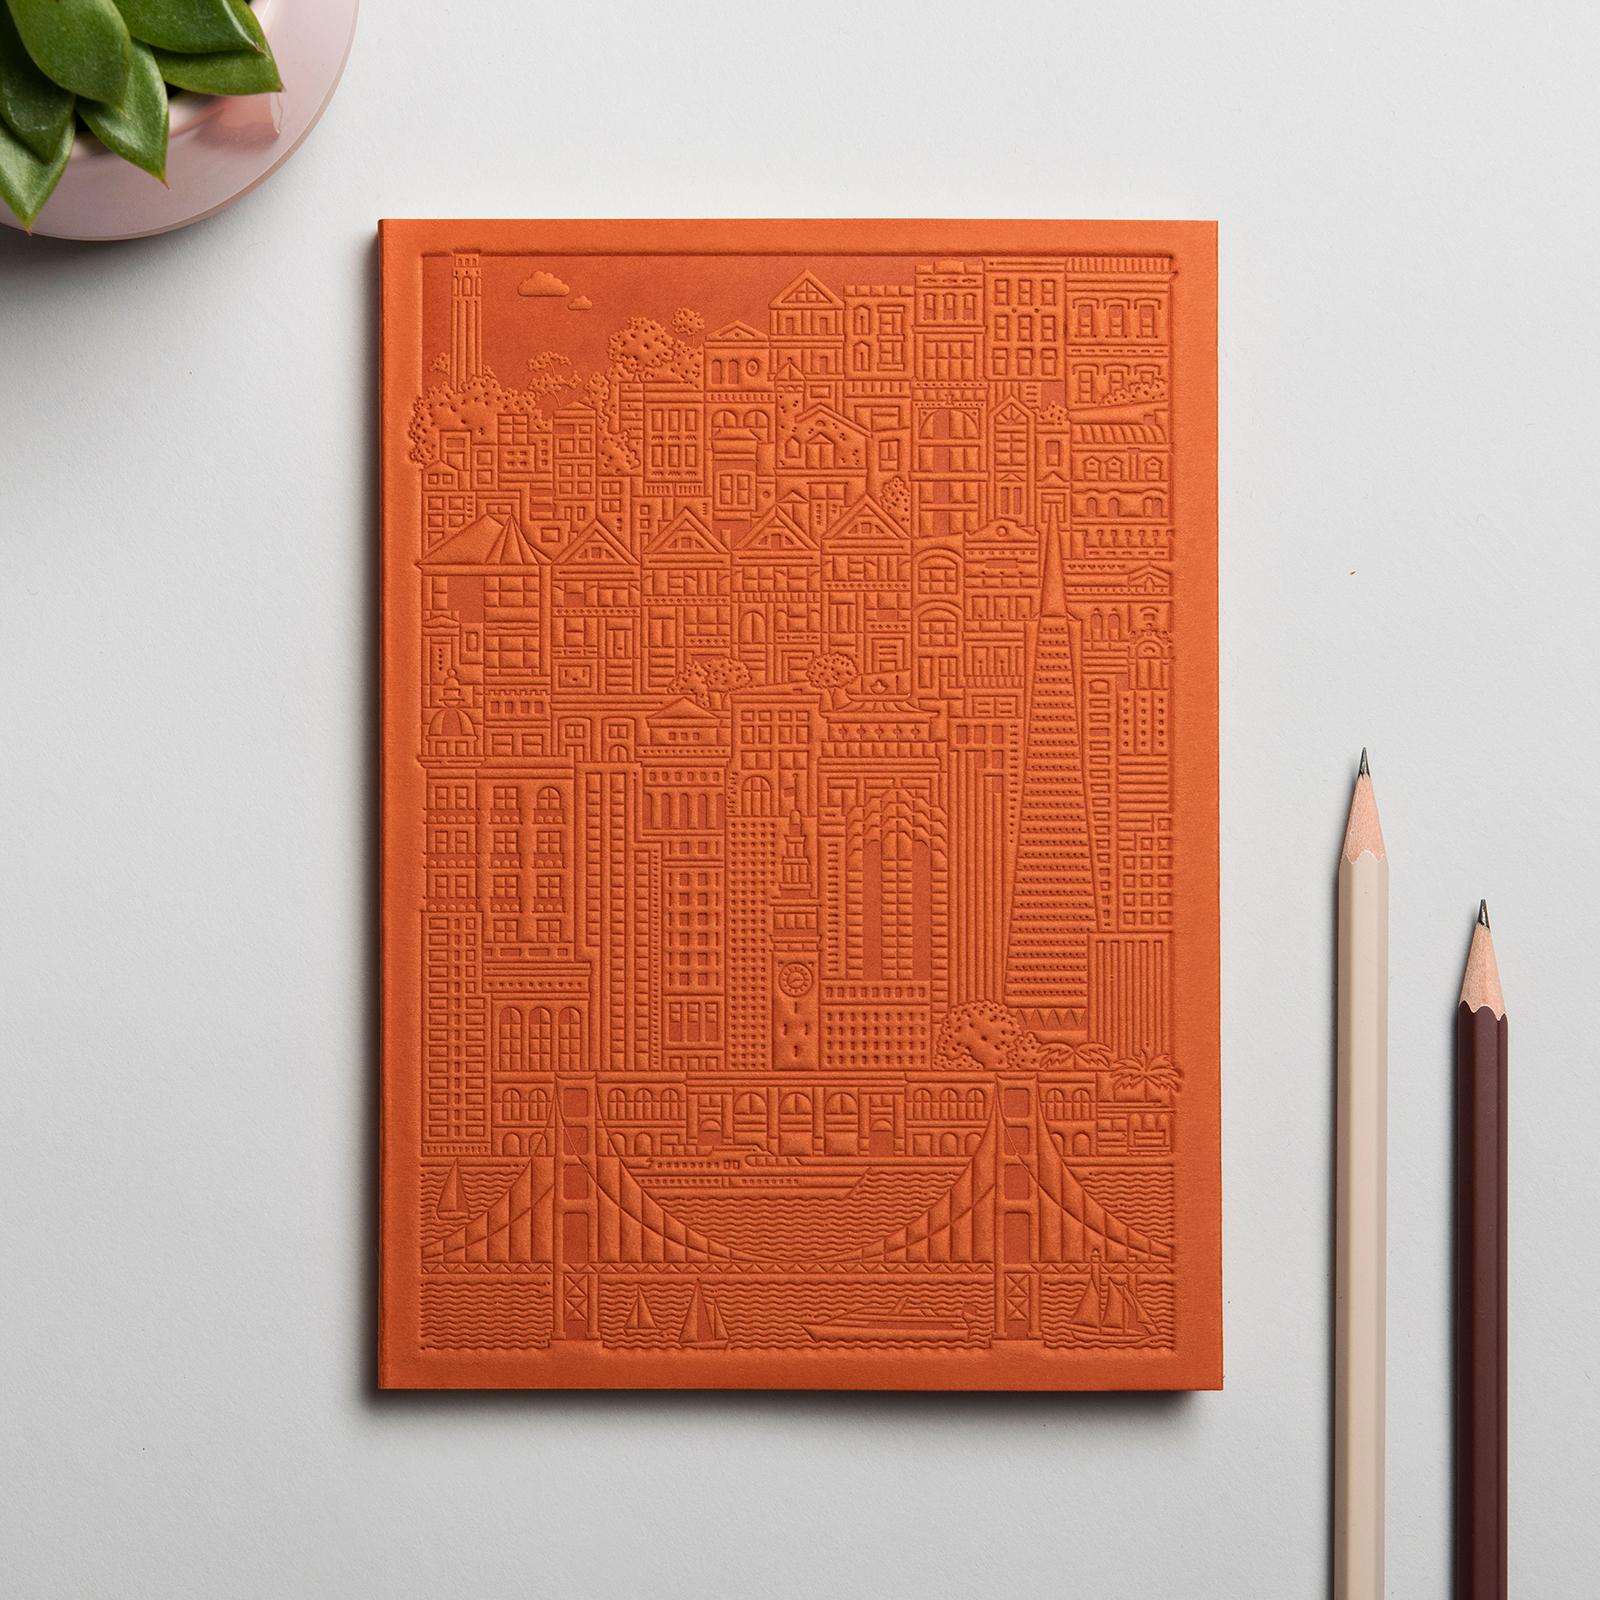 The San Francisco Notebook by The City Works